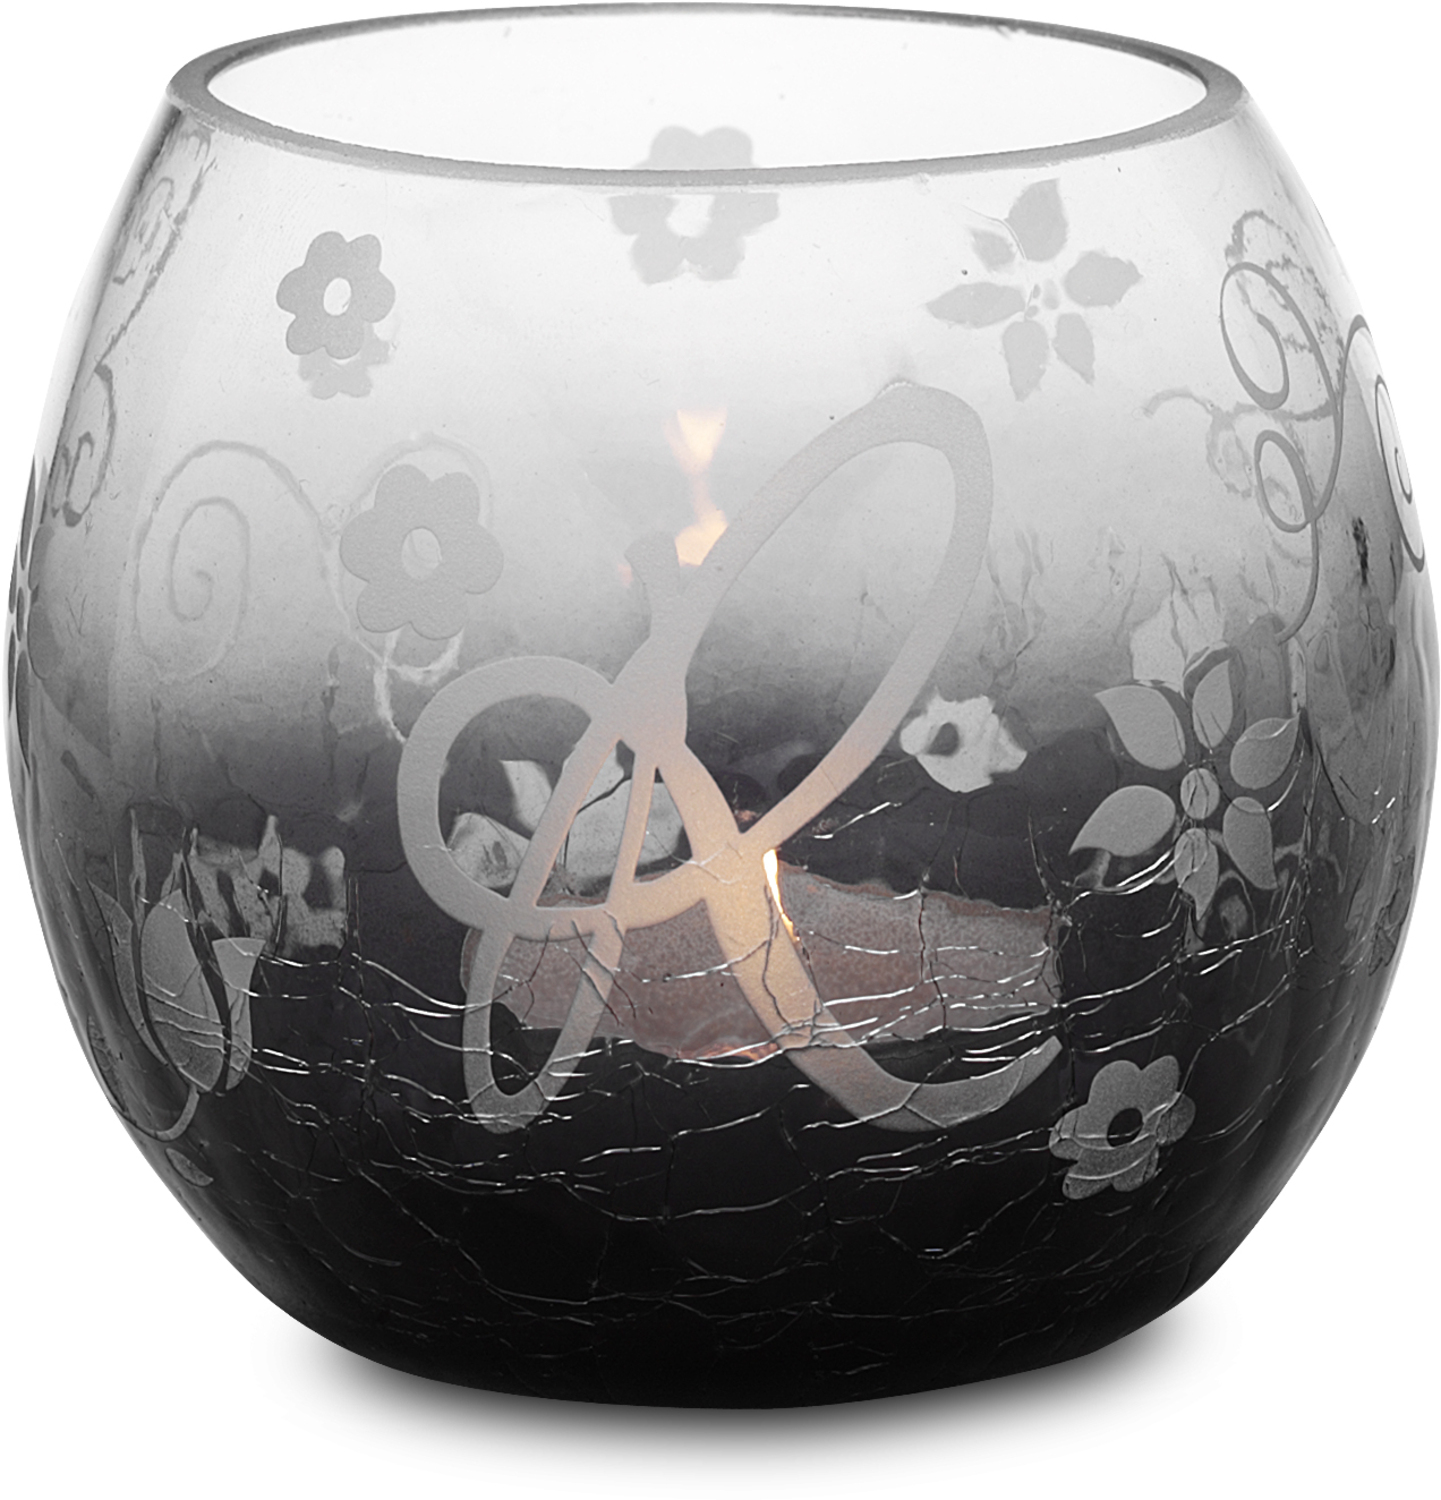 R Glass Candle Holder with Tealight by Black Tie - R Glass Candle Holder with Tealight - 3.5" Crackled Glass